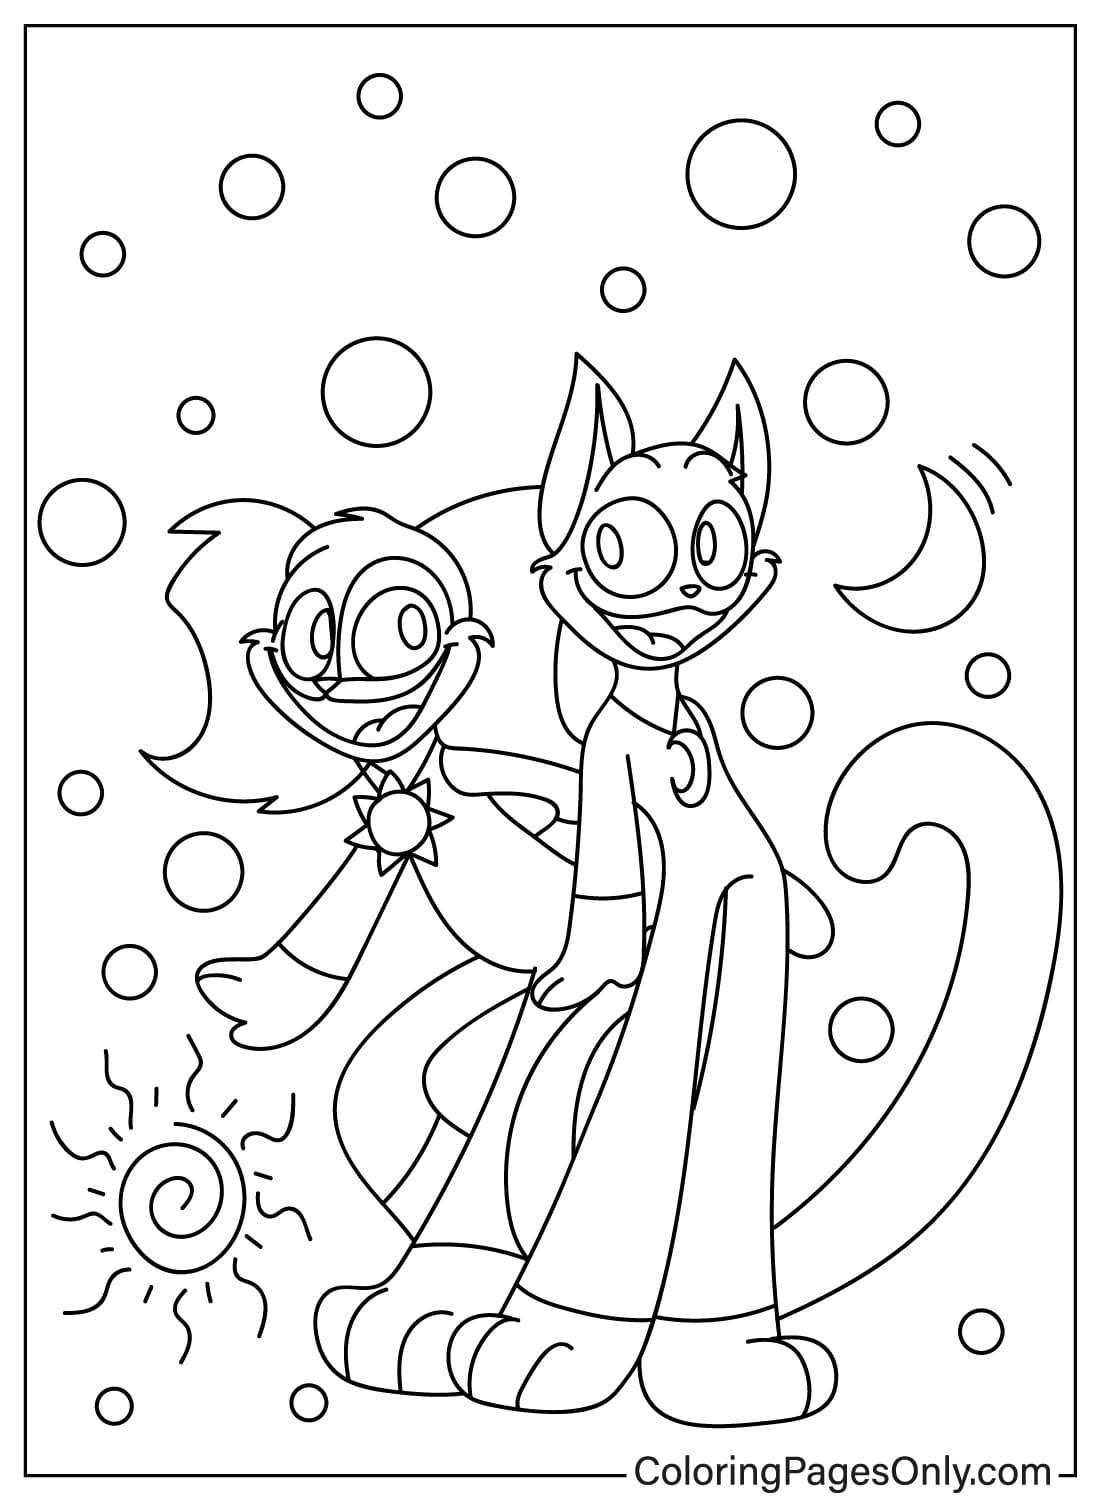 DogDay and CatNap Coloring Page Printable from DogDay